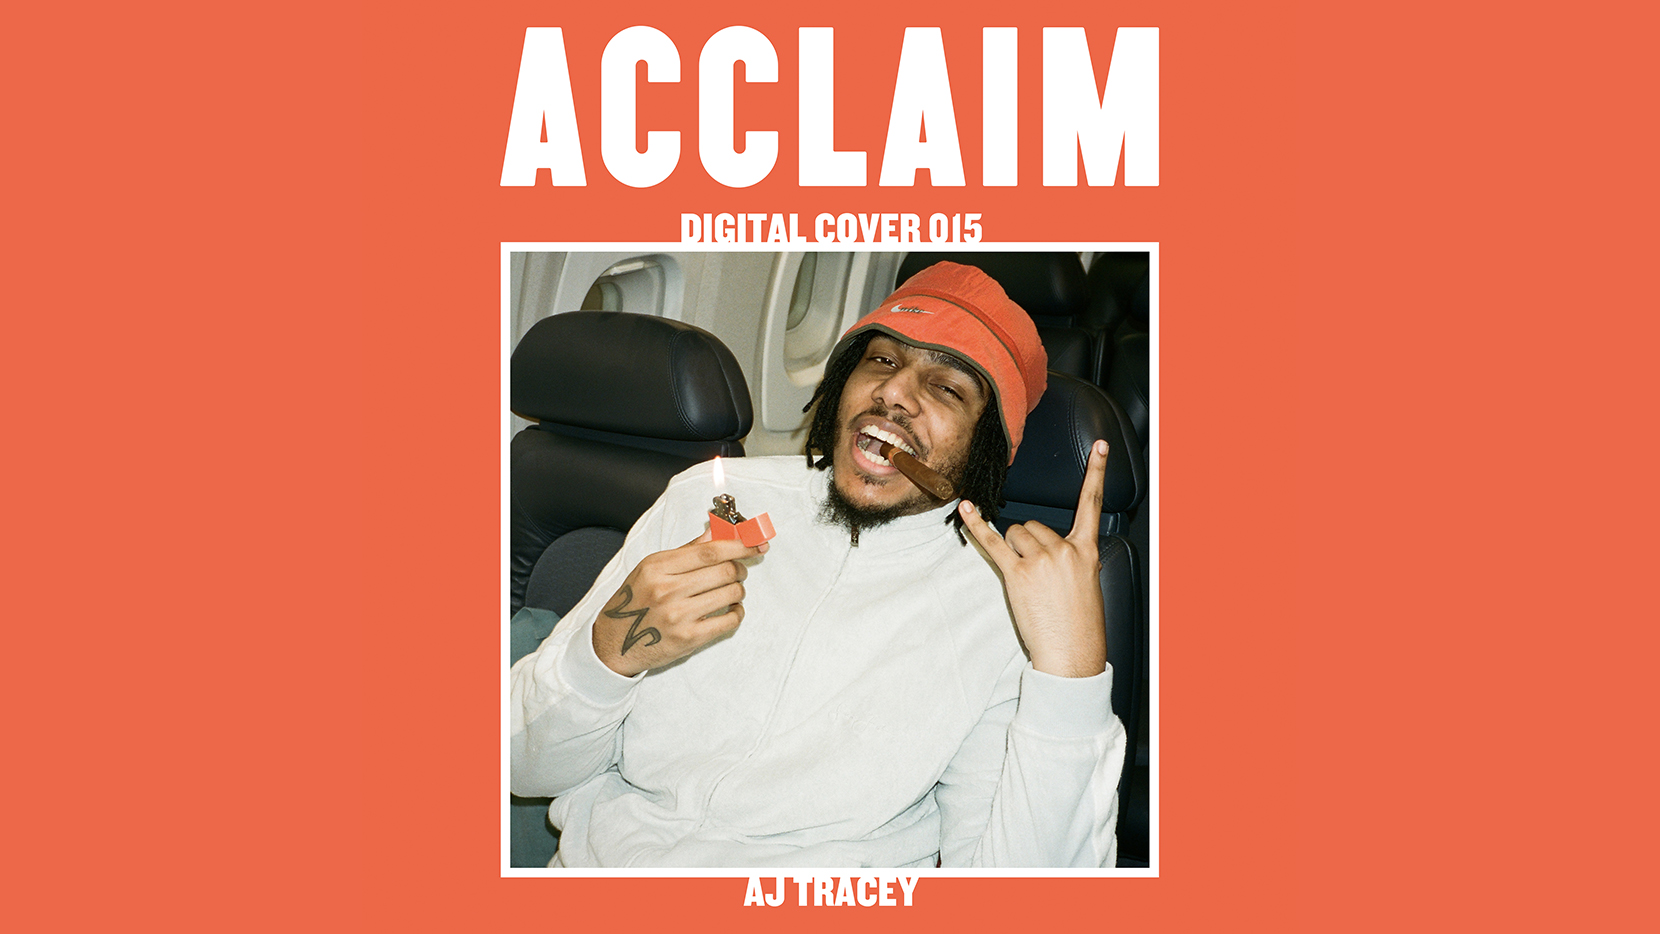 On The Cover – AJ Tracey: “I've gone through so much. It's been so